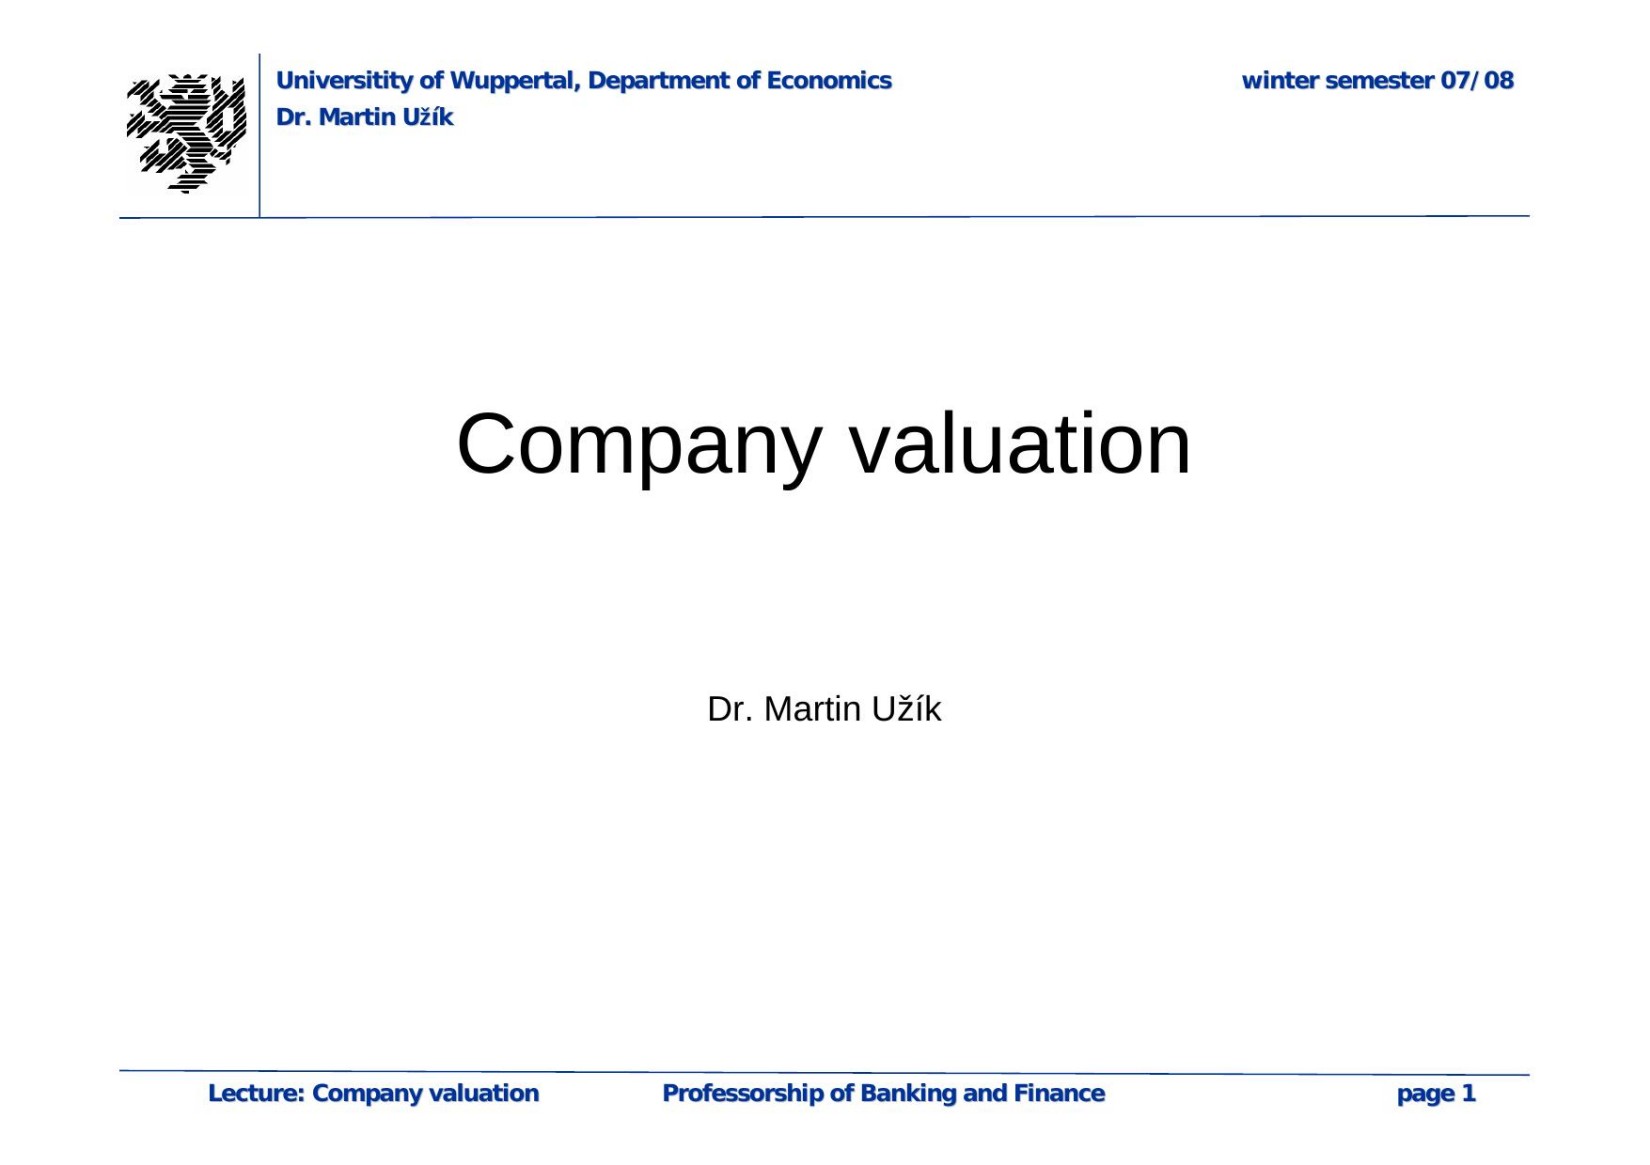 Microsoft PowerPoint - Company_Valuation.ppt